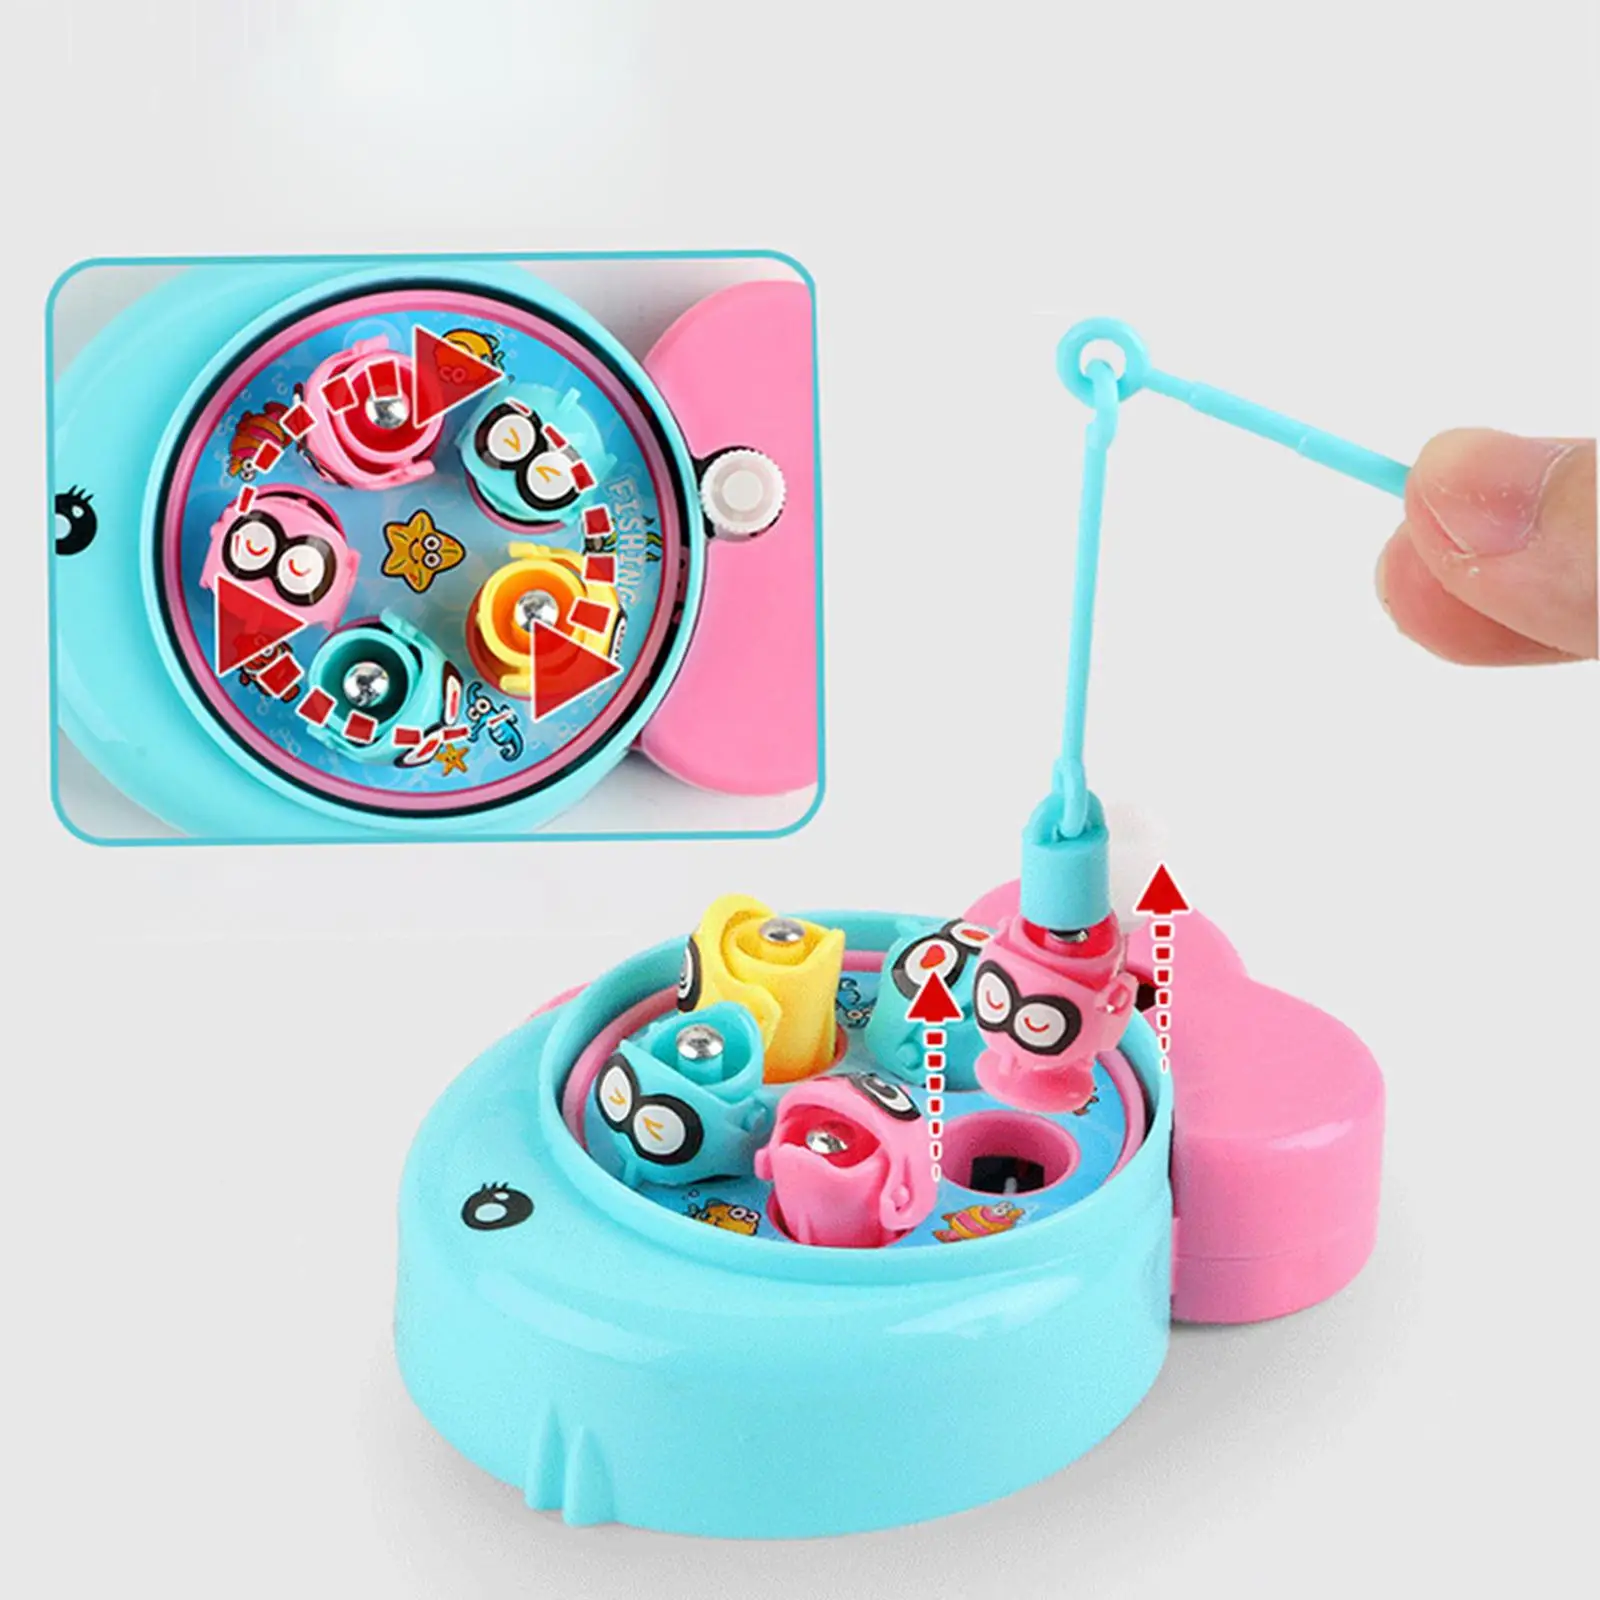 Portable Fishing Game Motor Skills Early Educational Toys Clock Toy for Girls and Boys Kids Children Birthday Gifts